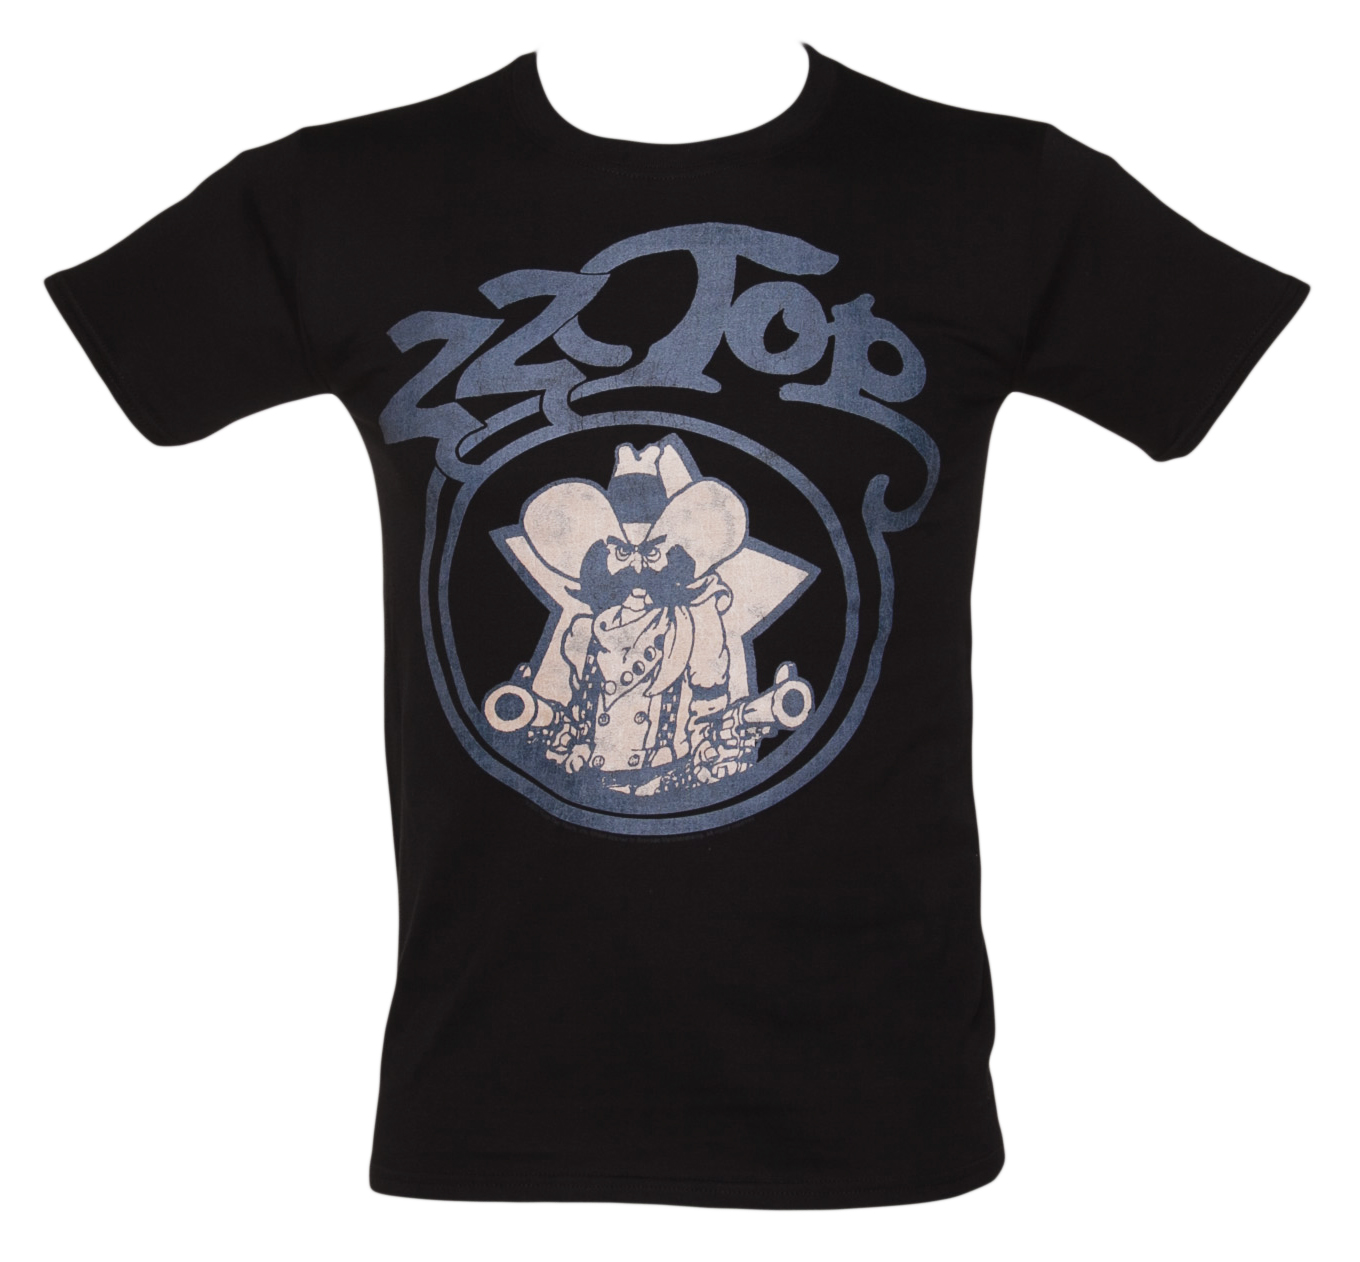 ZZ Top Outlaw Vintage T-Shirt